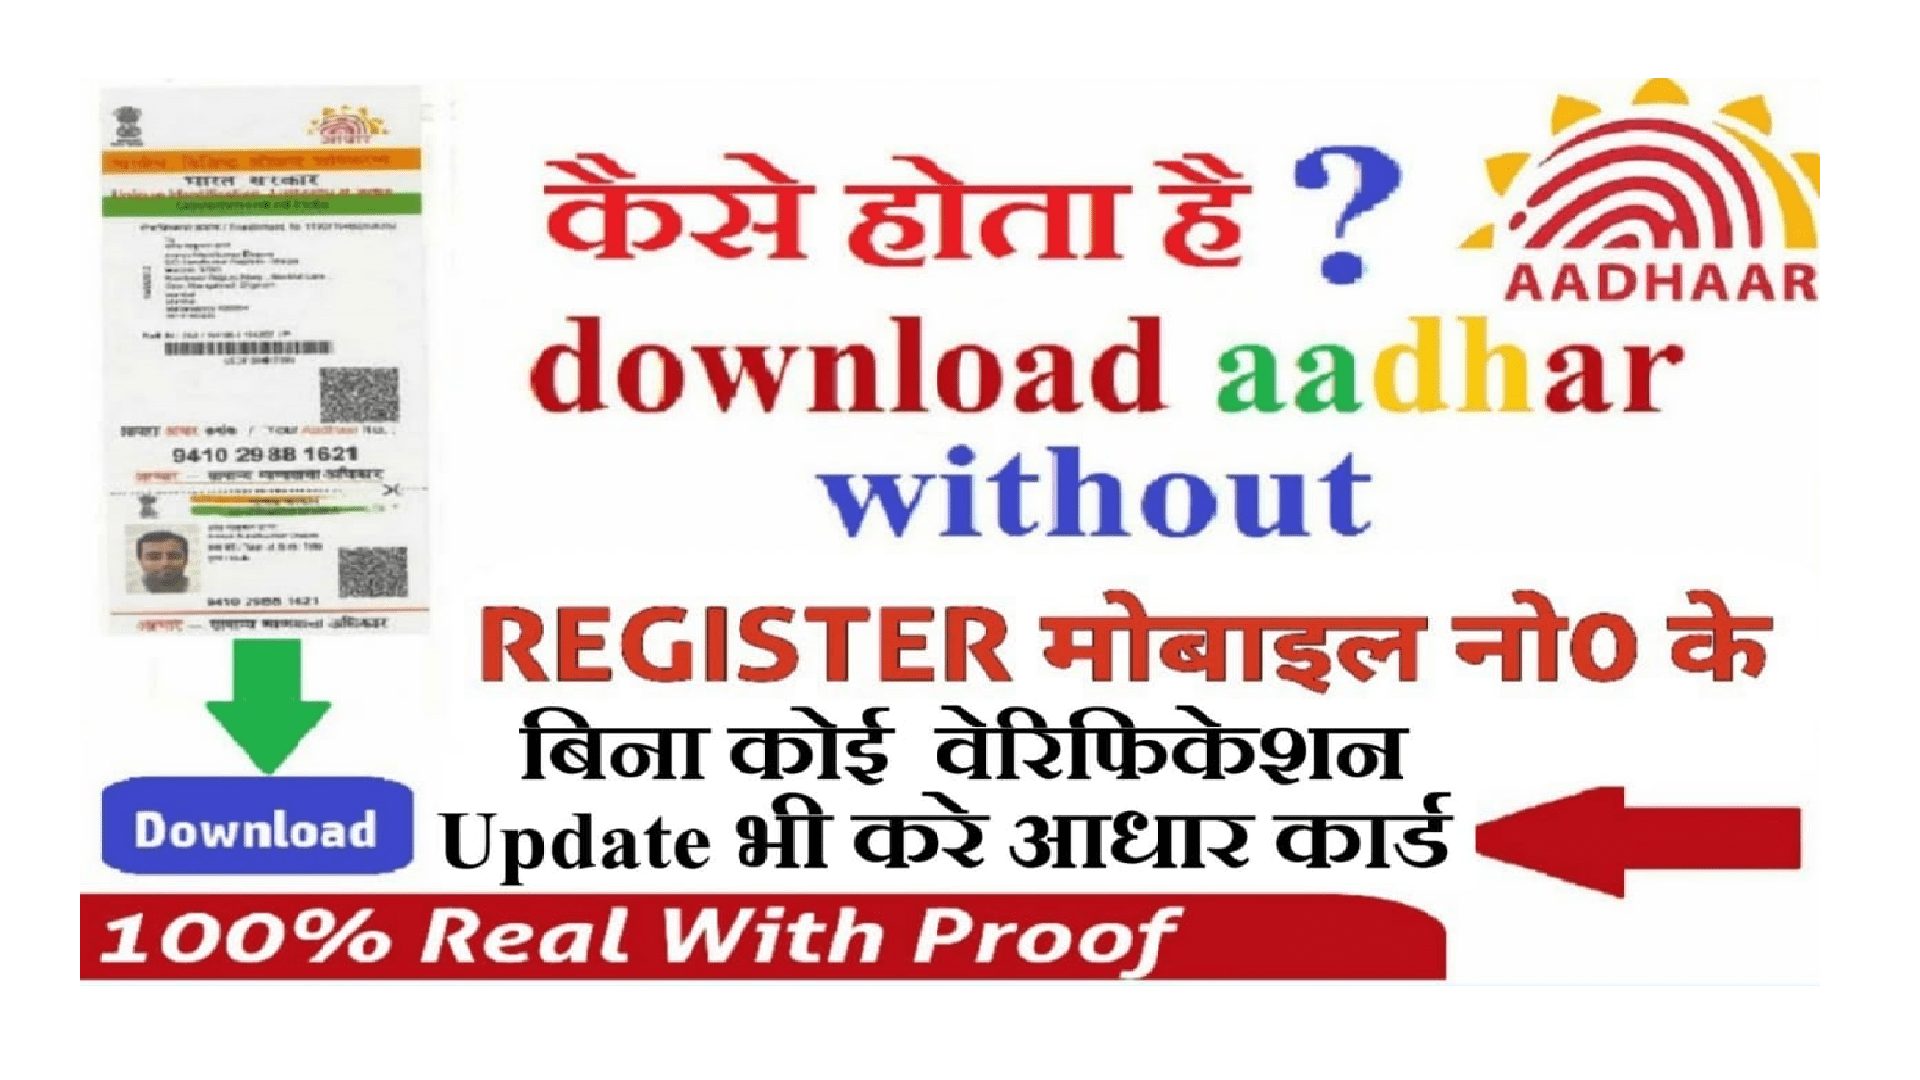 HOW-TO-DOWNLOAD-AADHAAR-CARD-WITHOUT-REGISTER-NUMBER-NUMBER, registered mobile number